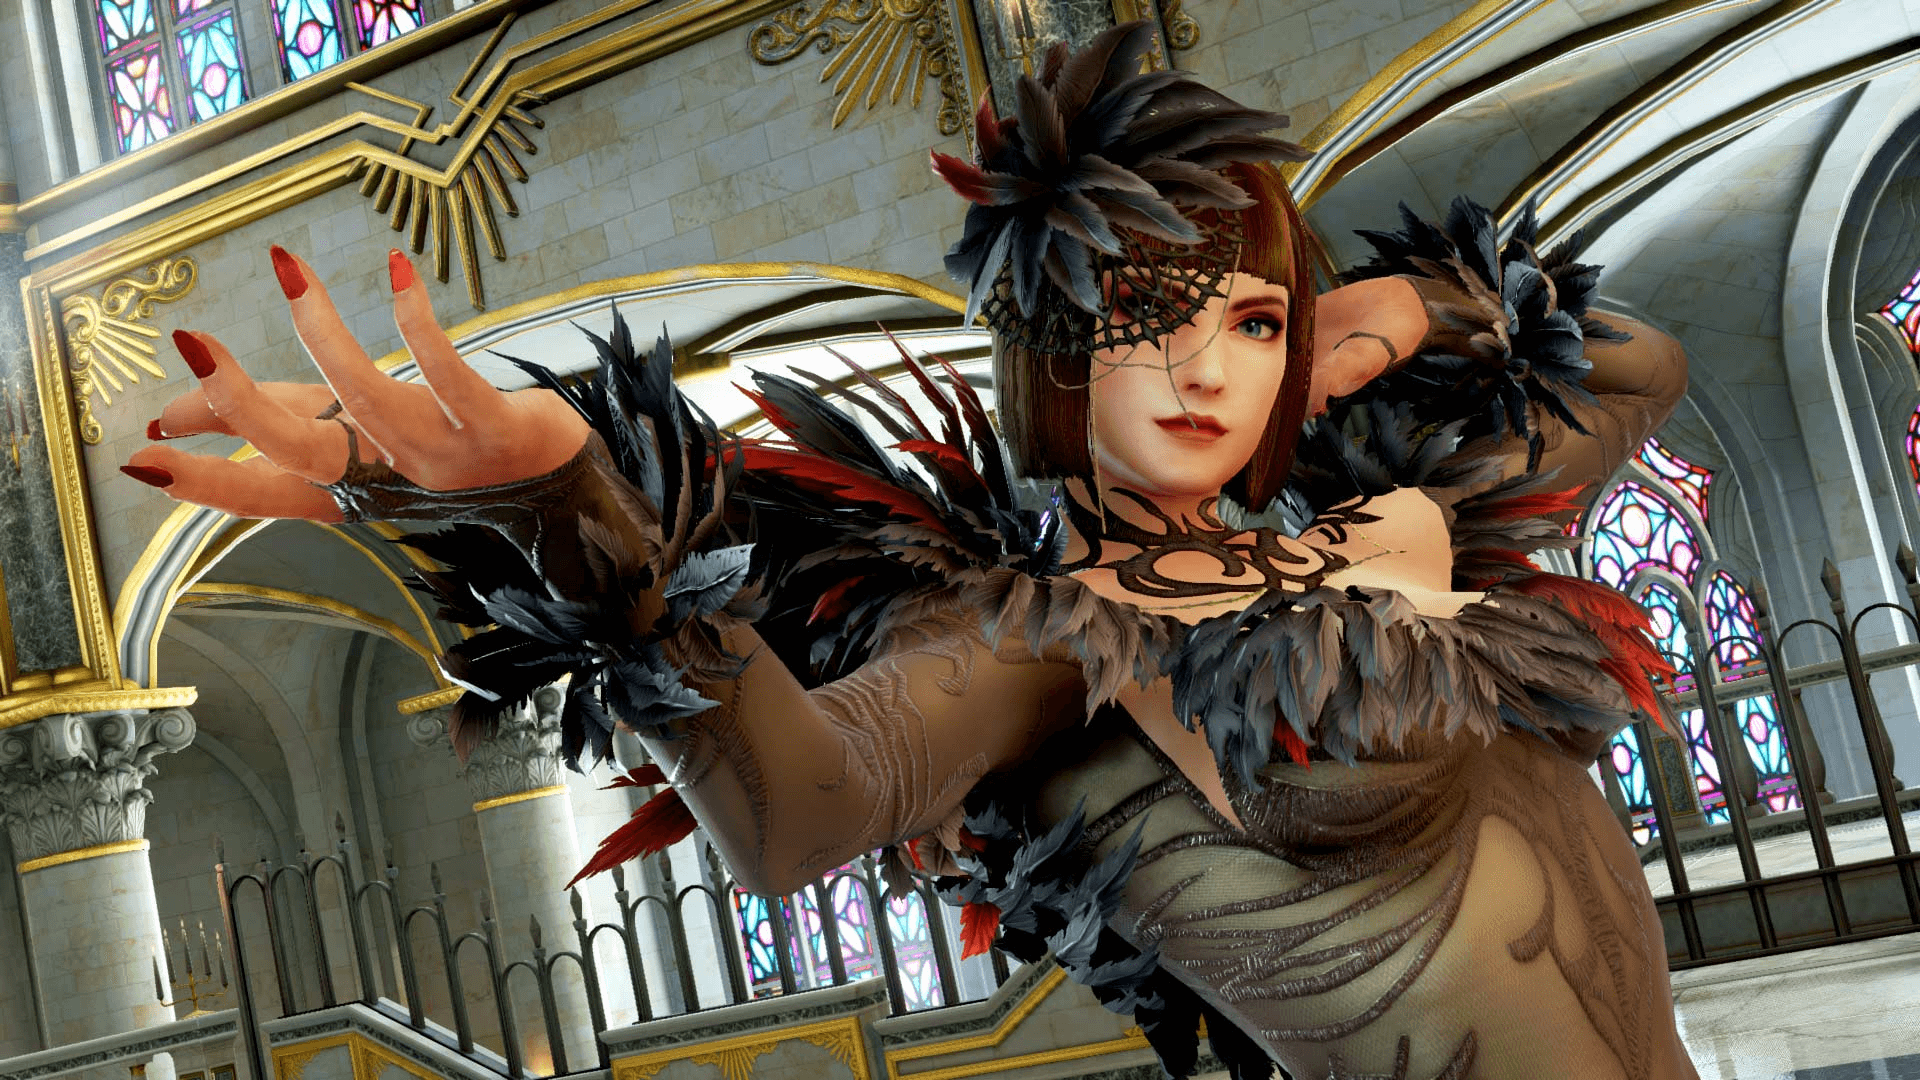 Joey Fury about Anna Williams: "Her design degrades the game"